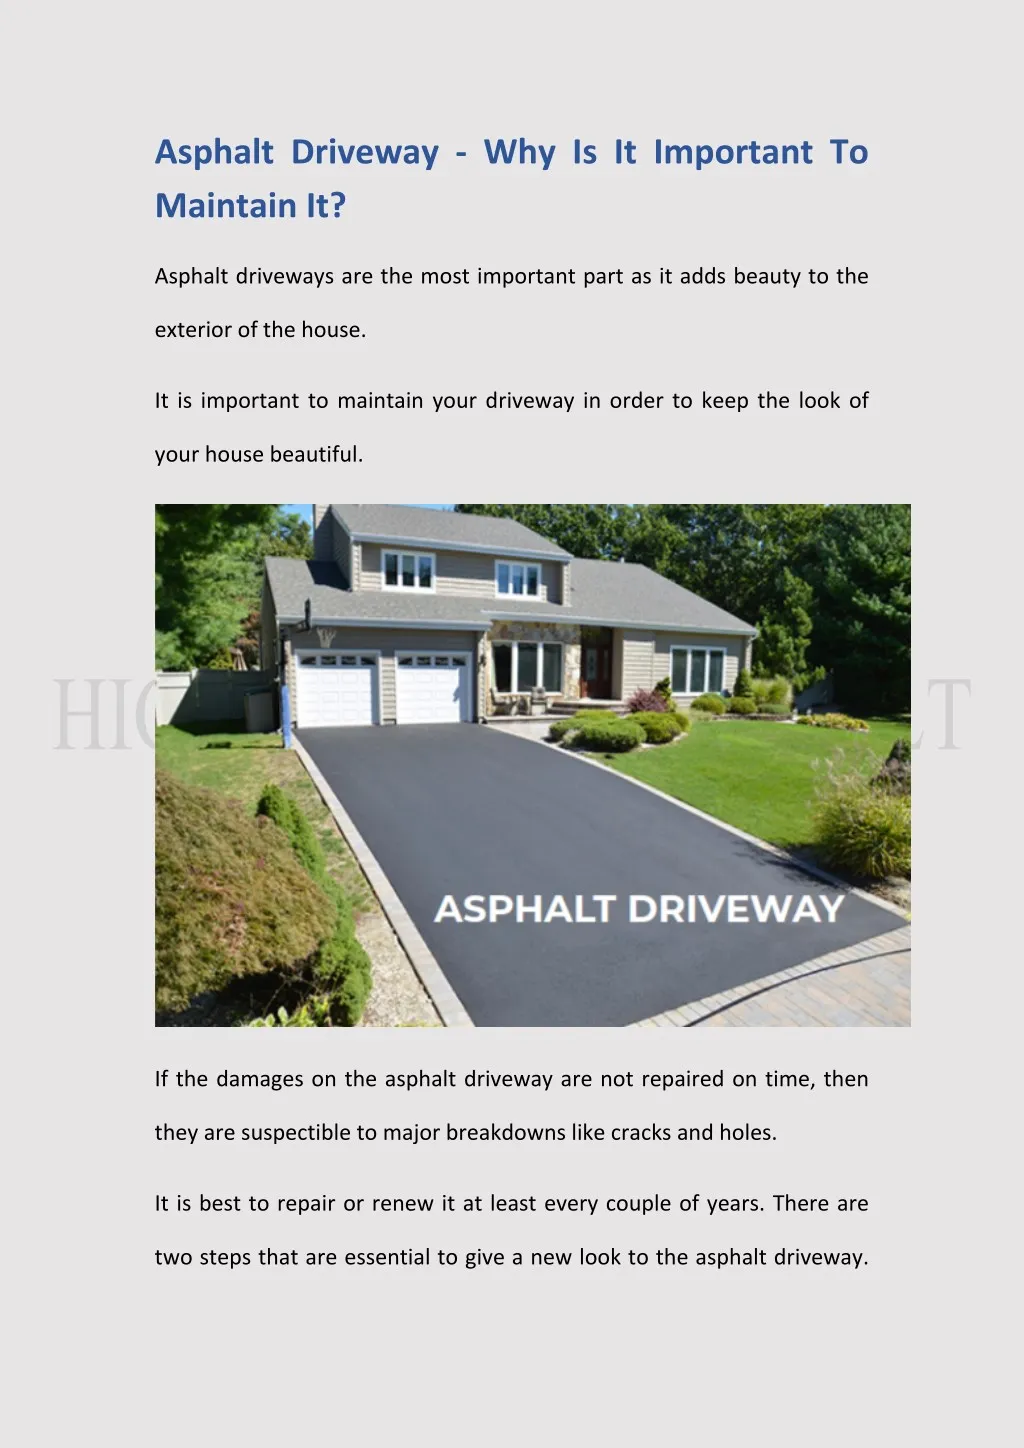 asphalt driveway why is it important to maintain